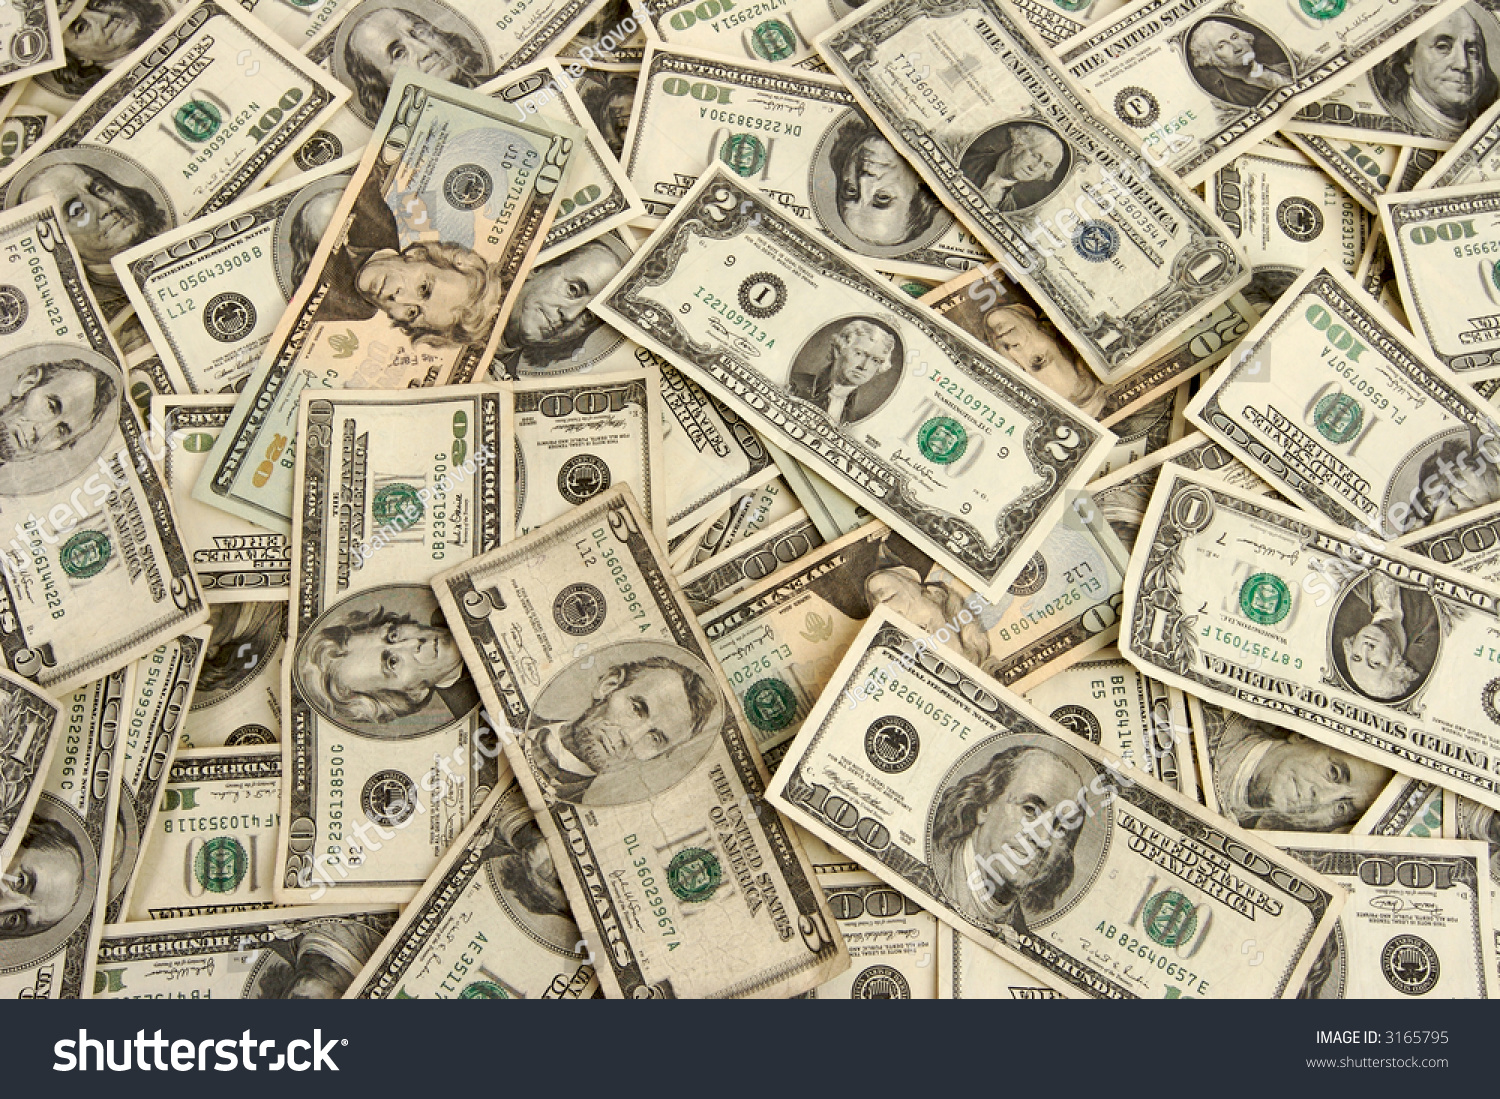 american-money-currency-in-assorted-bills-background-stock-photo